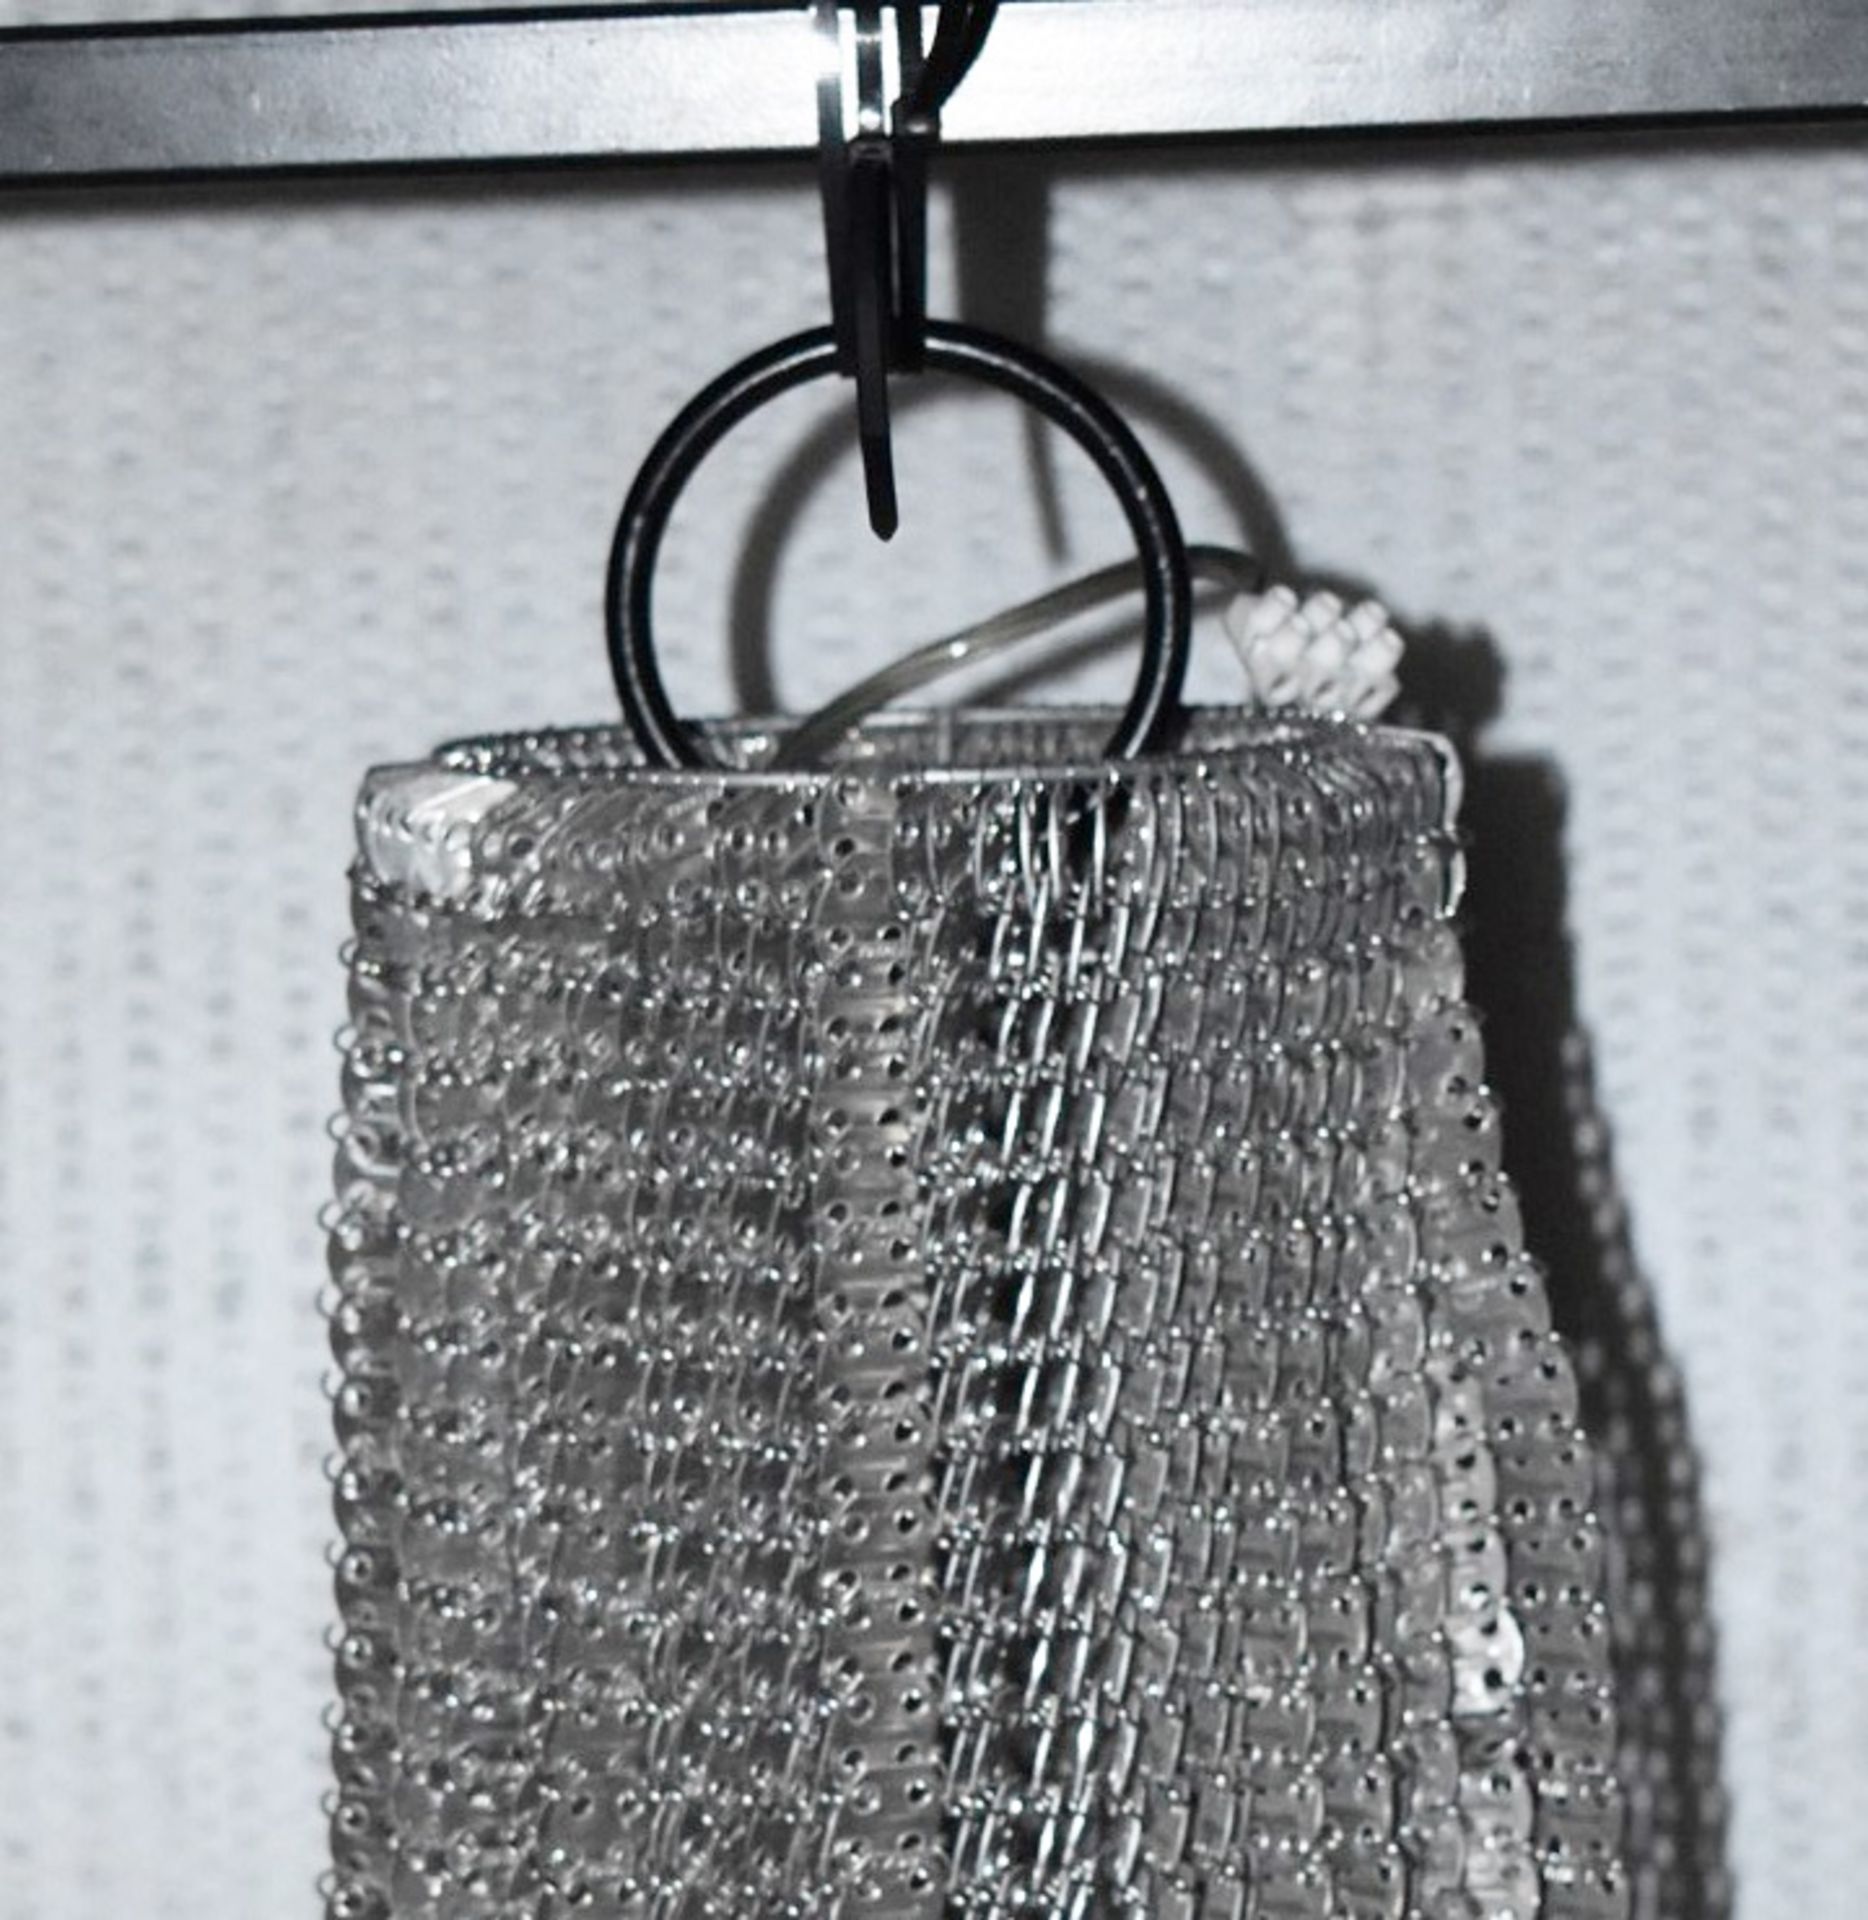 1 x Opulent Chainmail Chandelier with Crystal Glass Droplets - Procured From An Exclusive Property - Image 8 of 8